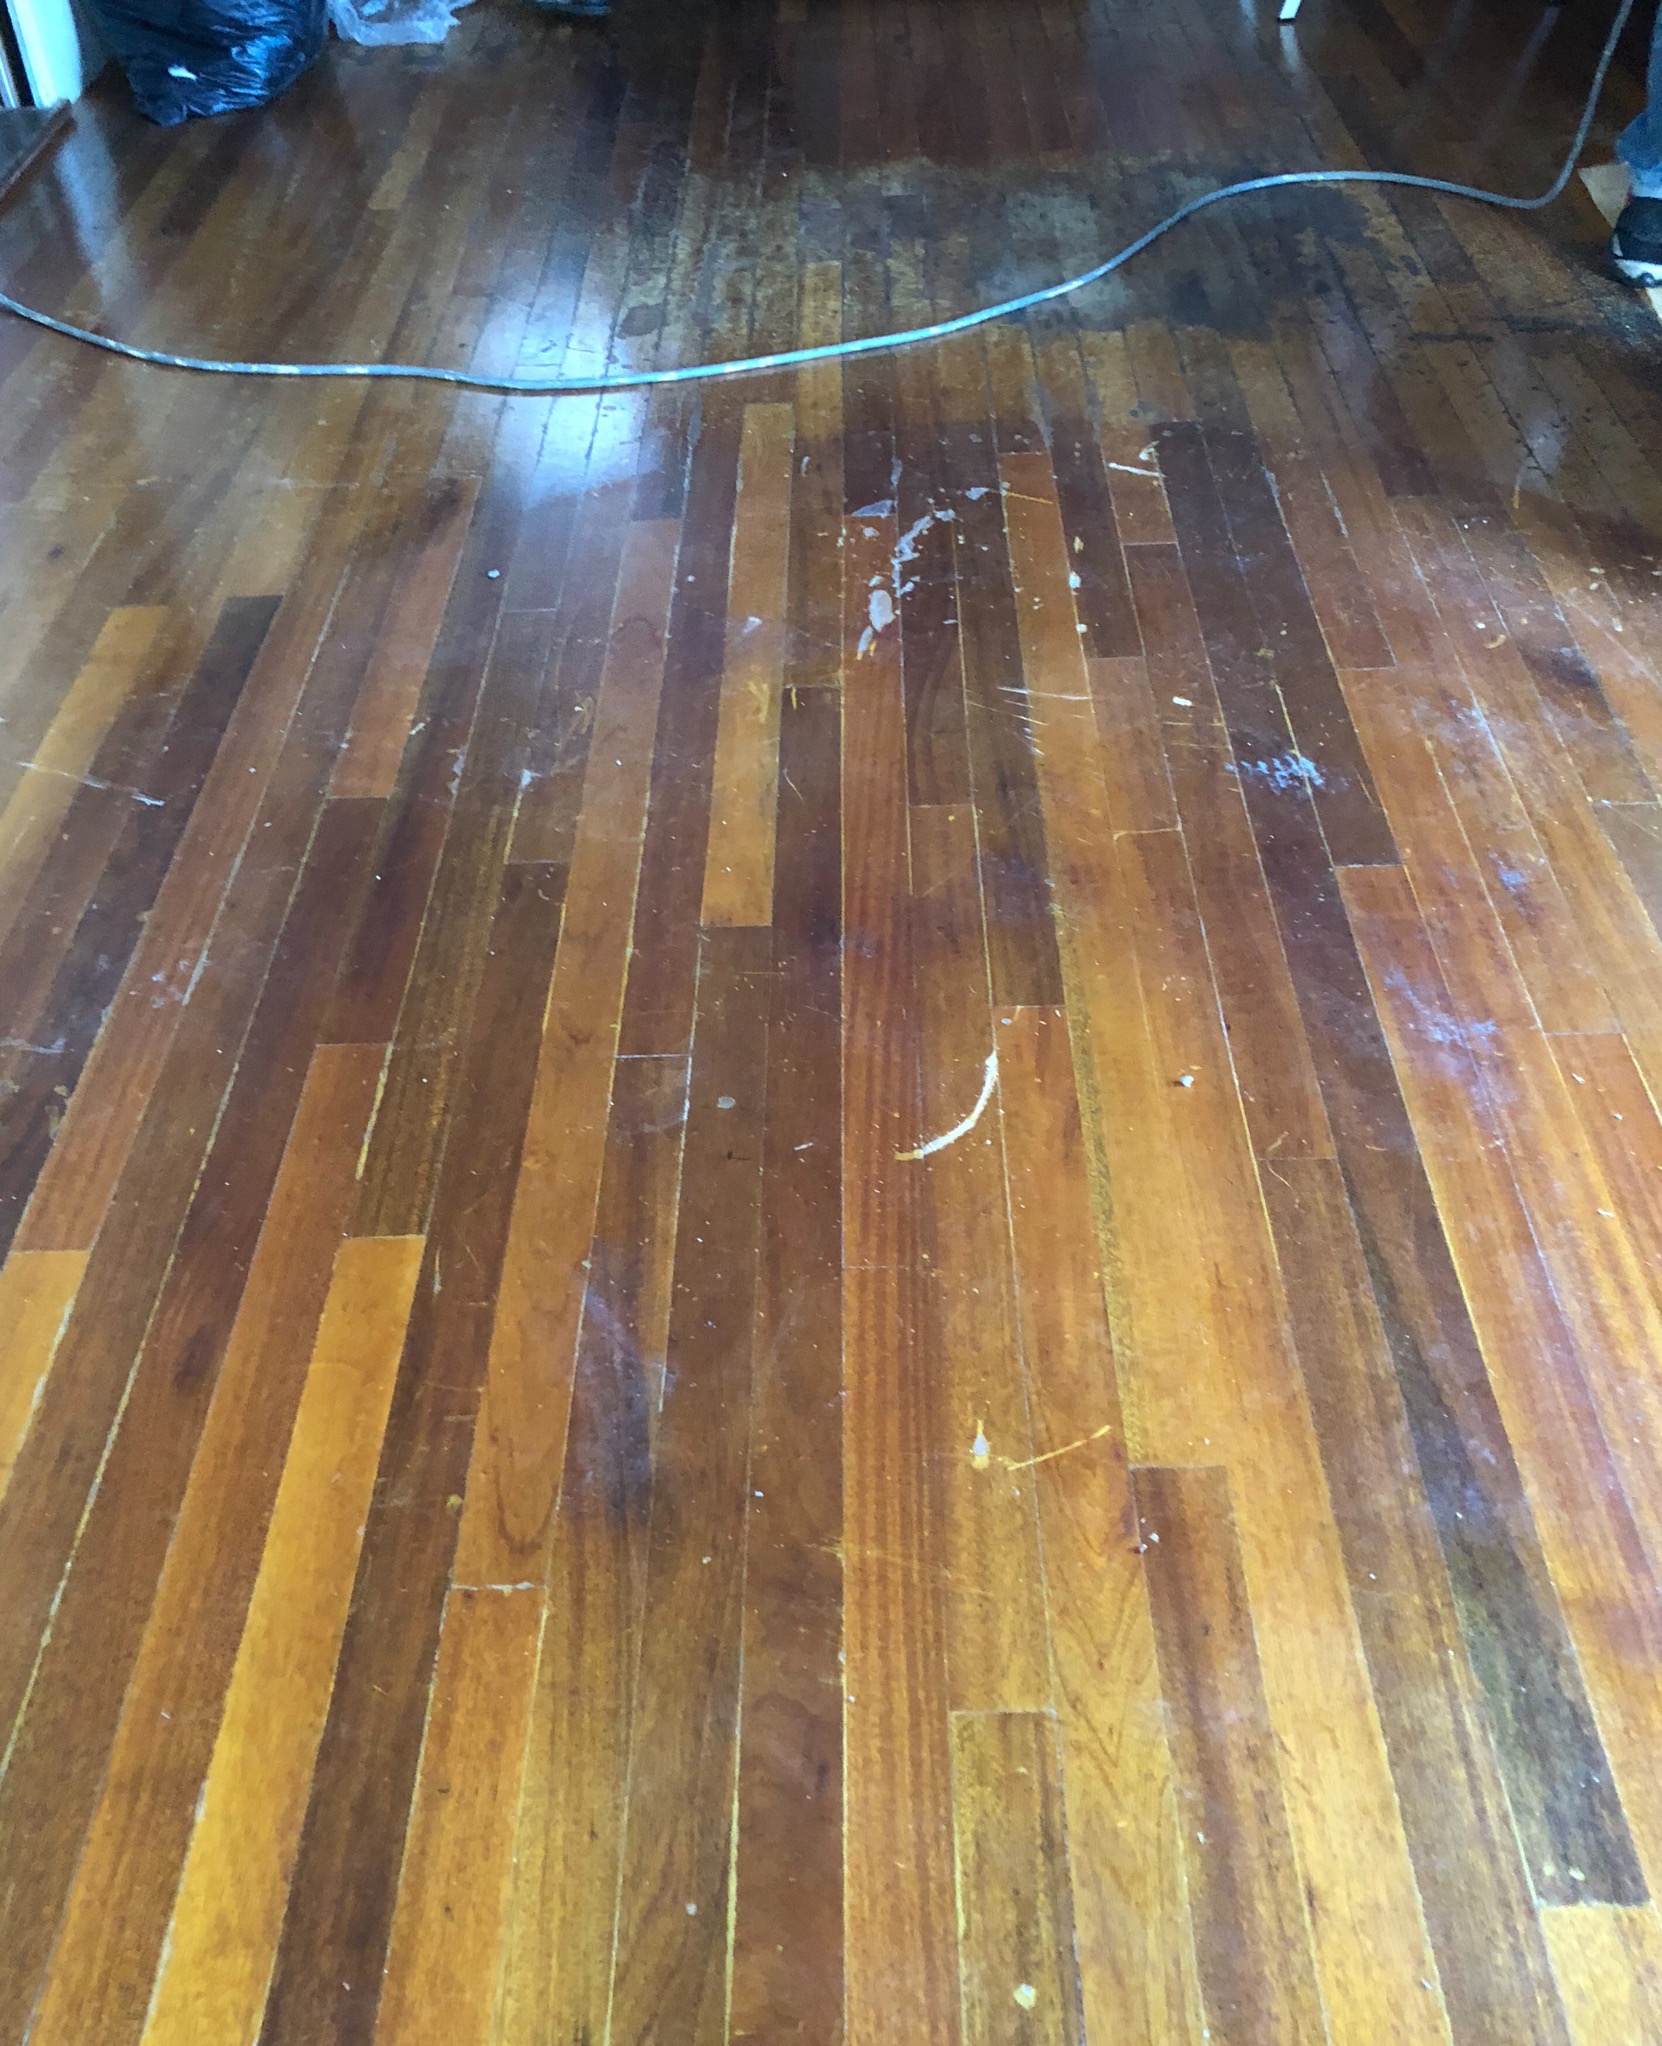 This is the before picture of the floor.